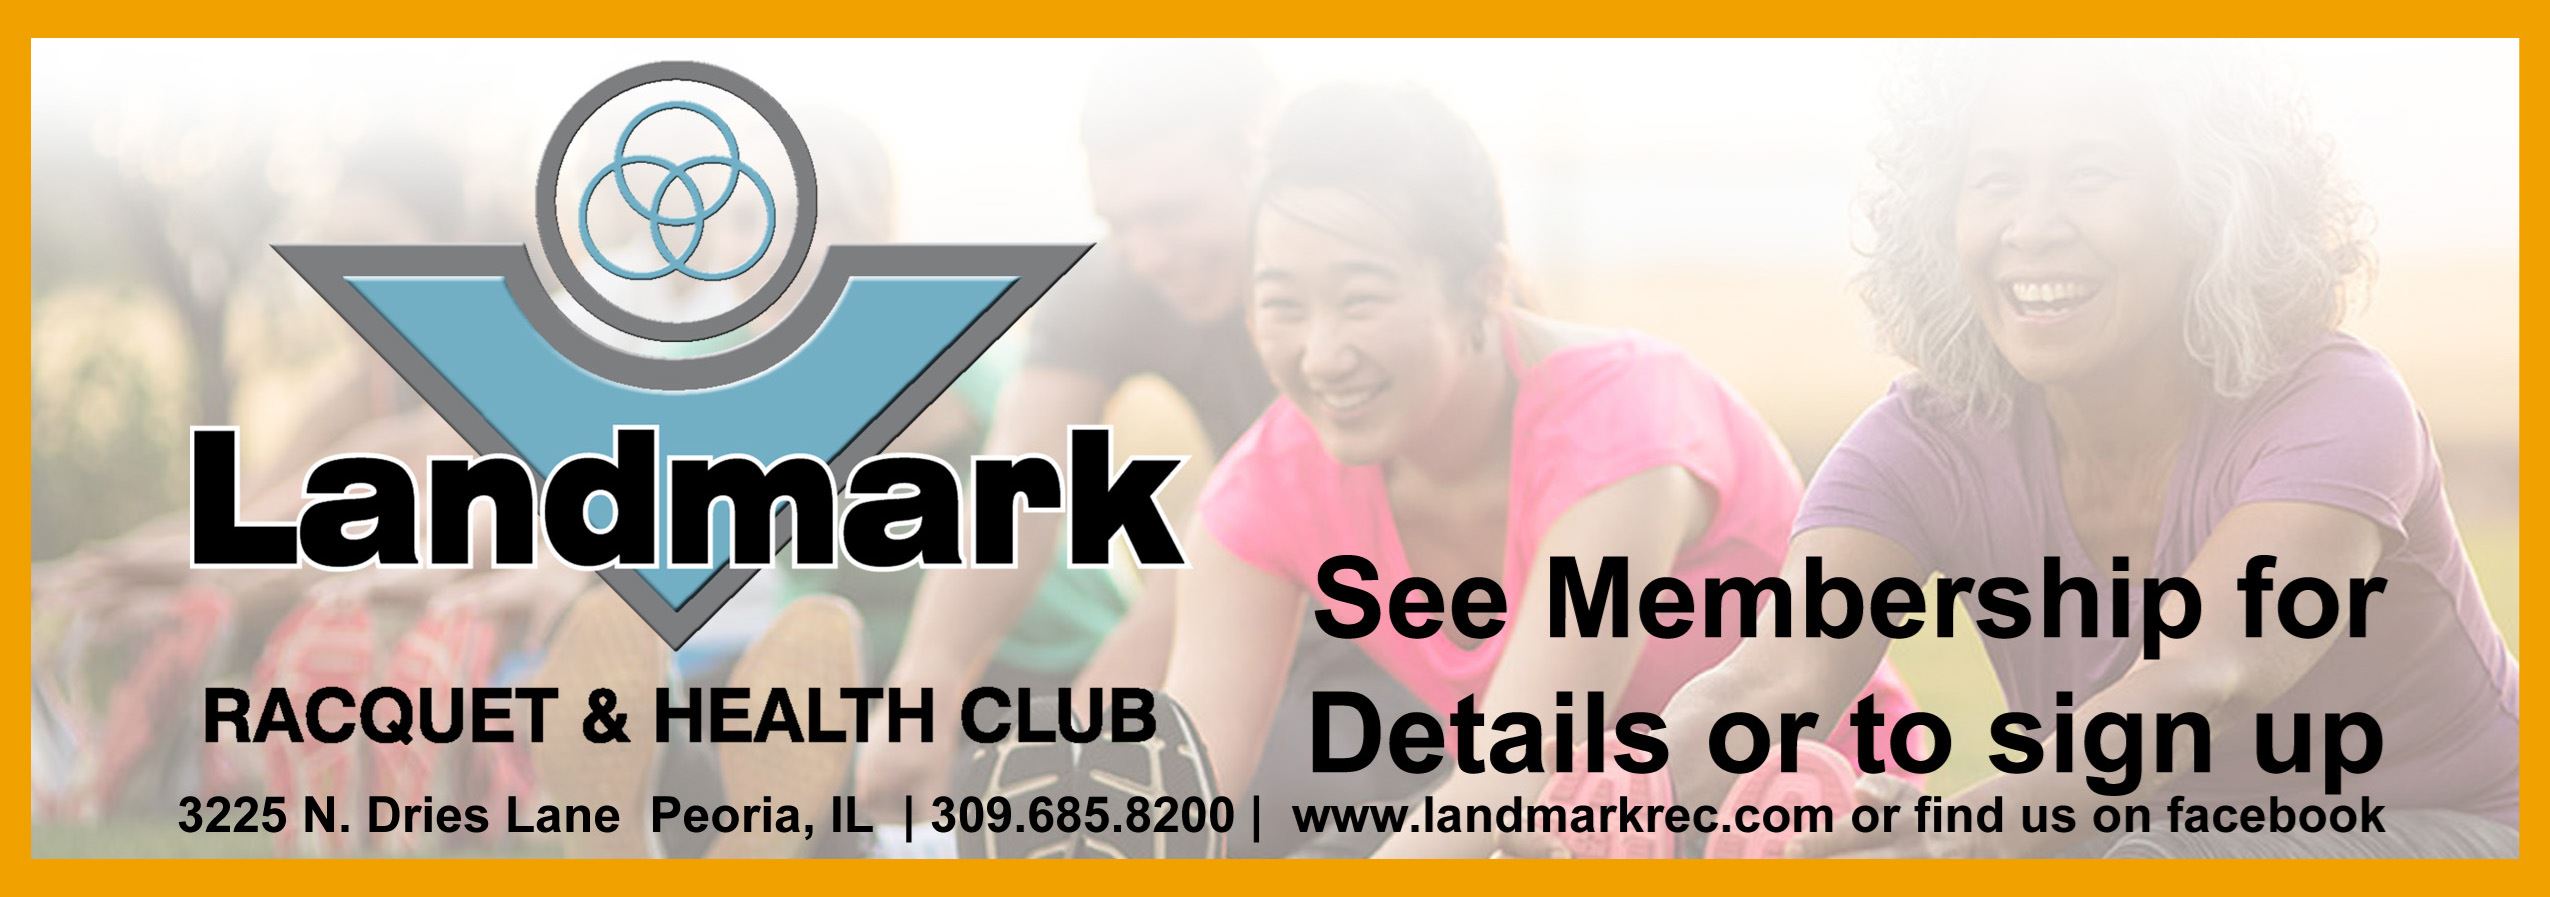 Landmark Racquet & Health Club - See membership for details or to sign up